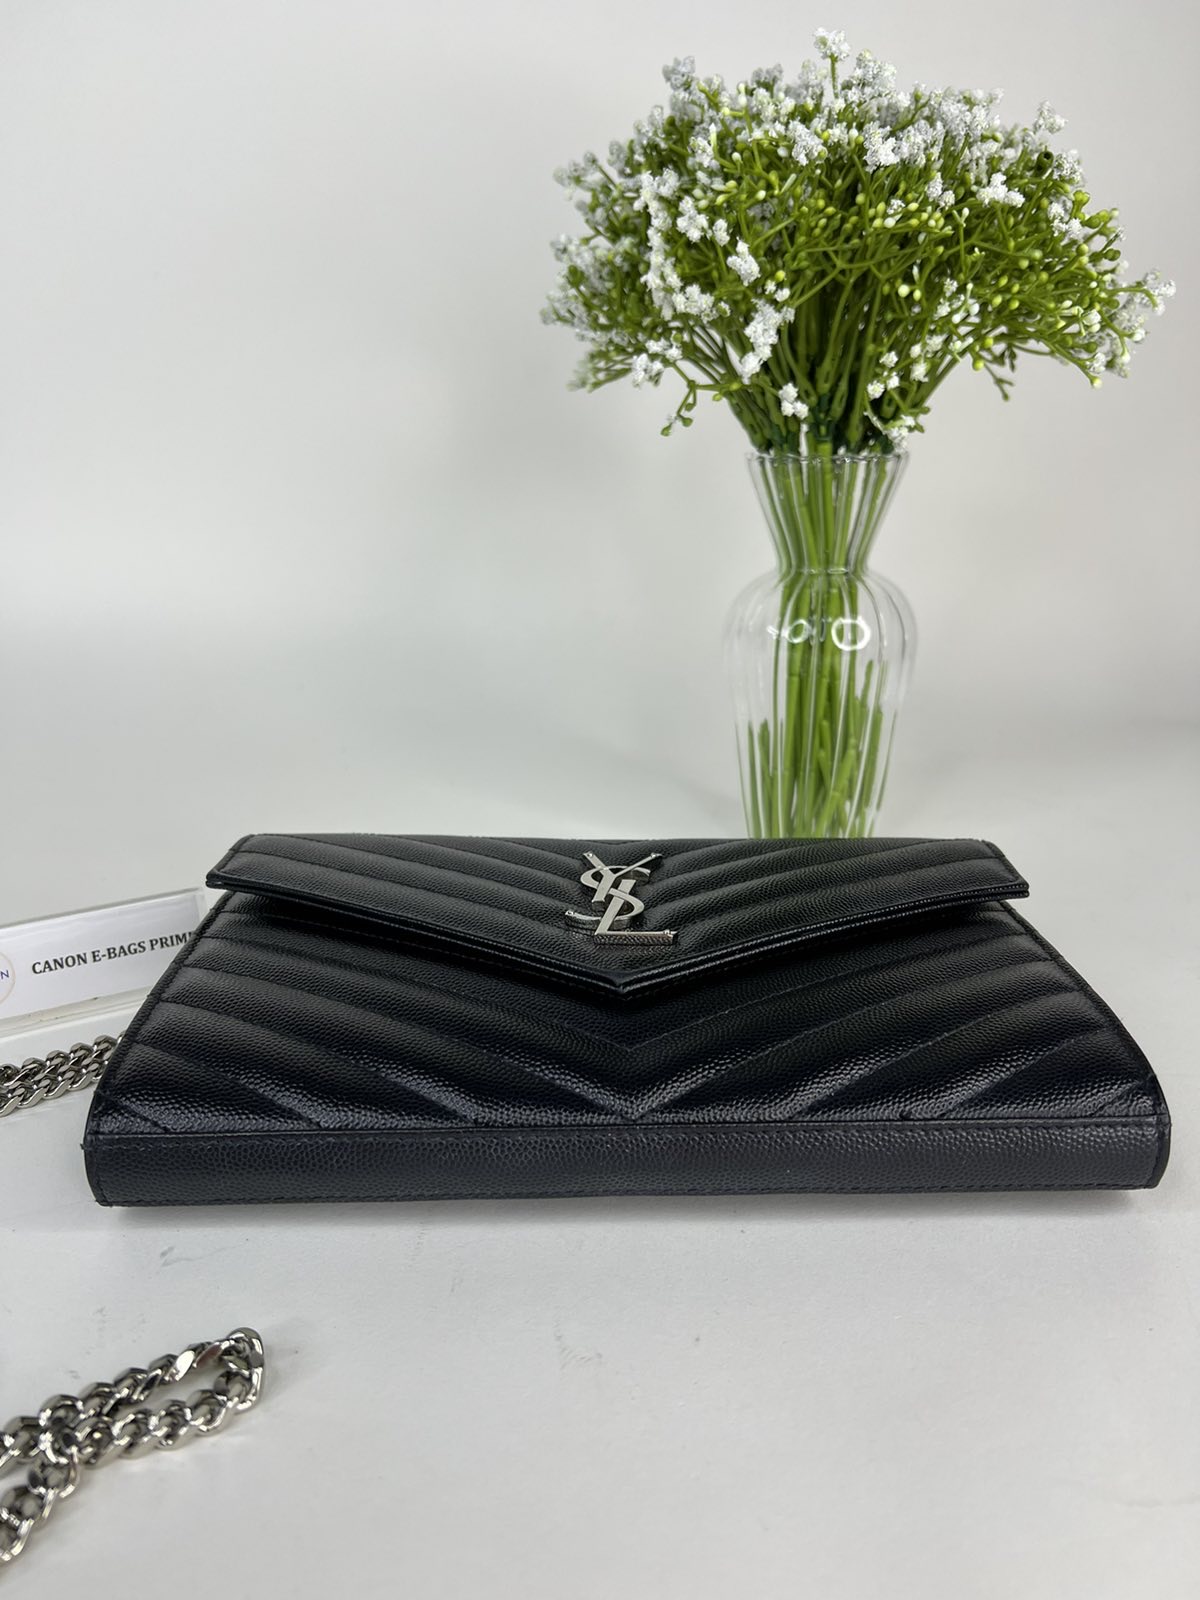 YSL Black Wallet on Chain GM Silver Hardware. Made in Italy. With